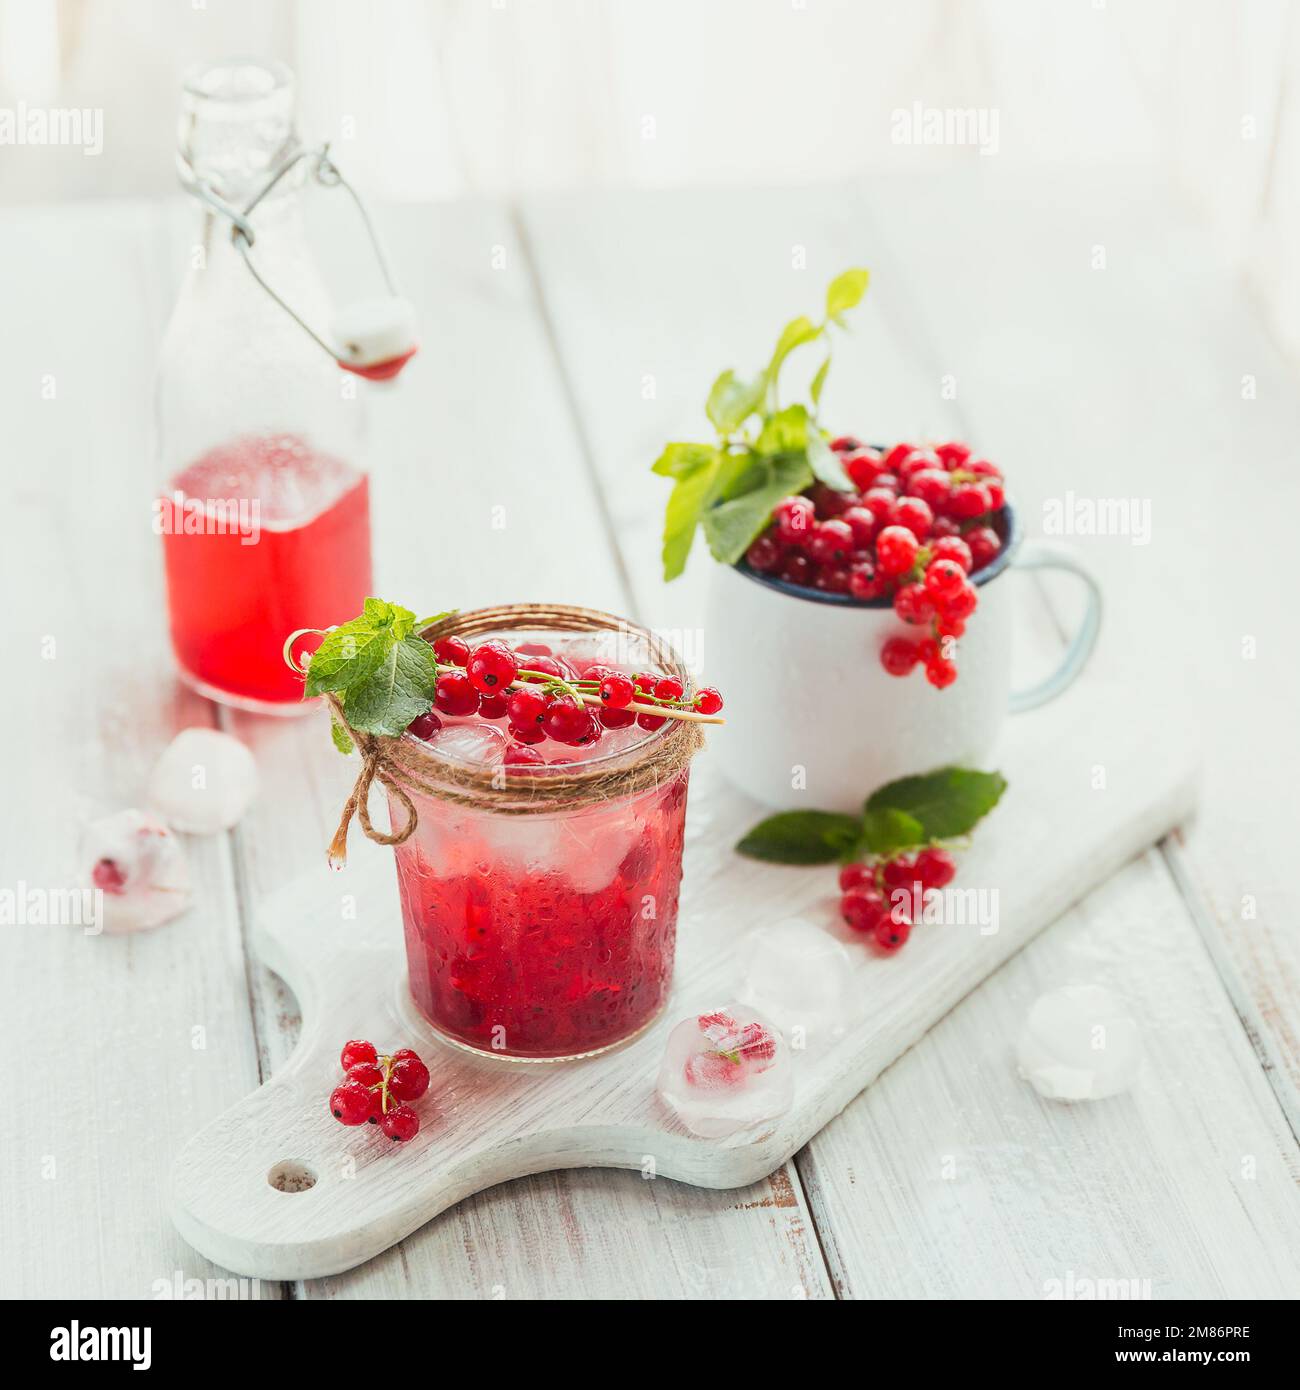 Summer drink with white sparkling wine. Homemade refreshing fruit cocktail or punch with champagne, red currant, ice cubes and mint leaves on white Stock Photo